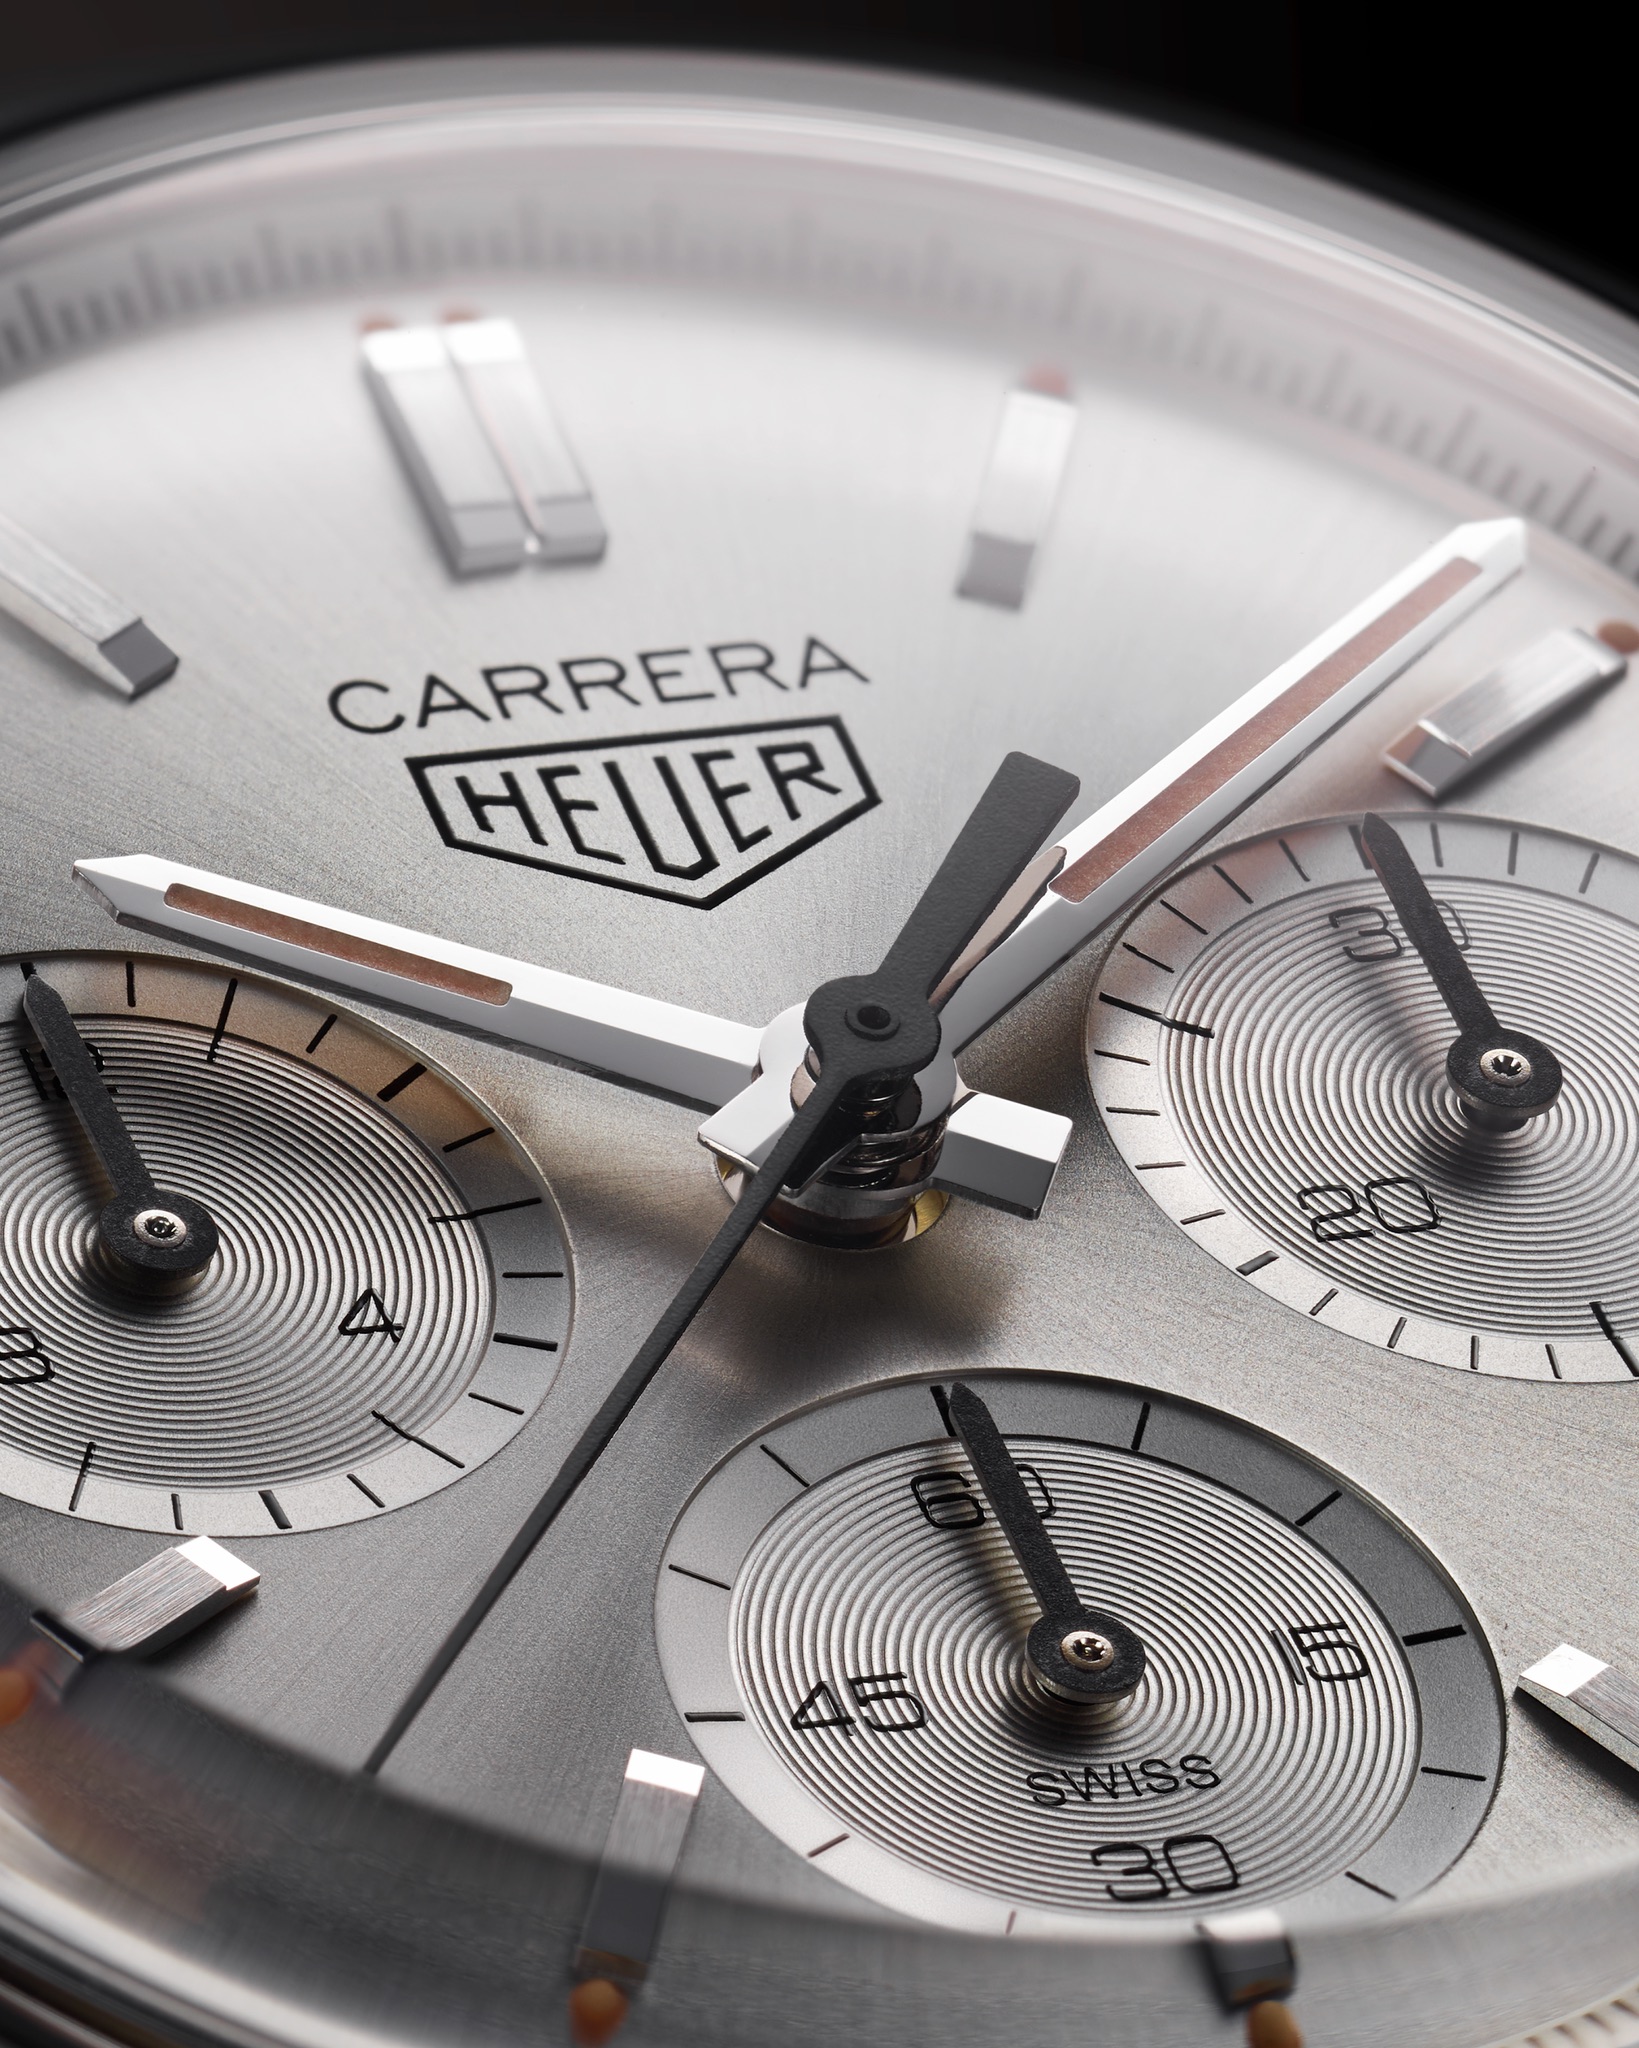 TAG Heuer Carrera Silver 160 Years Limited Edition watch